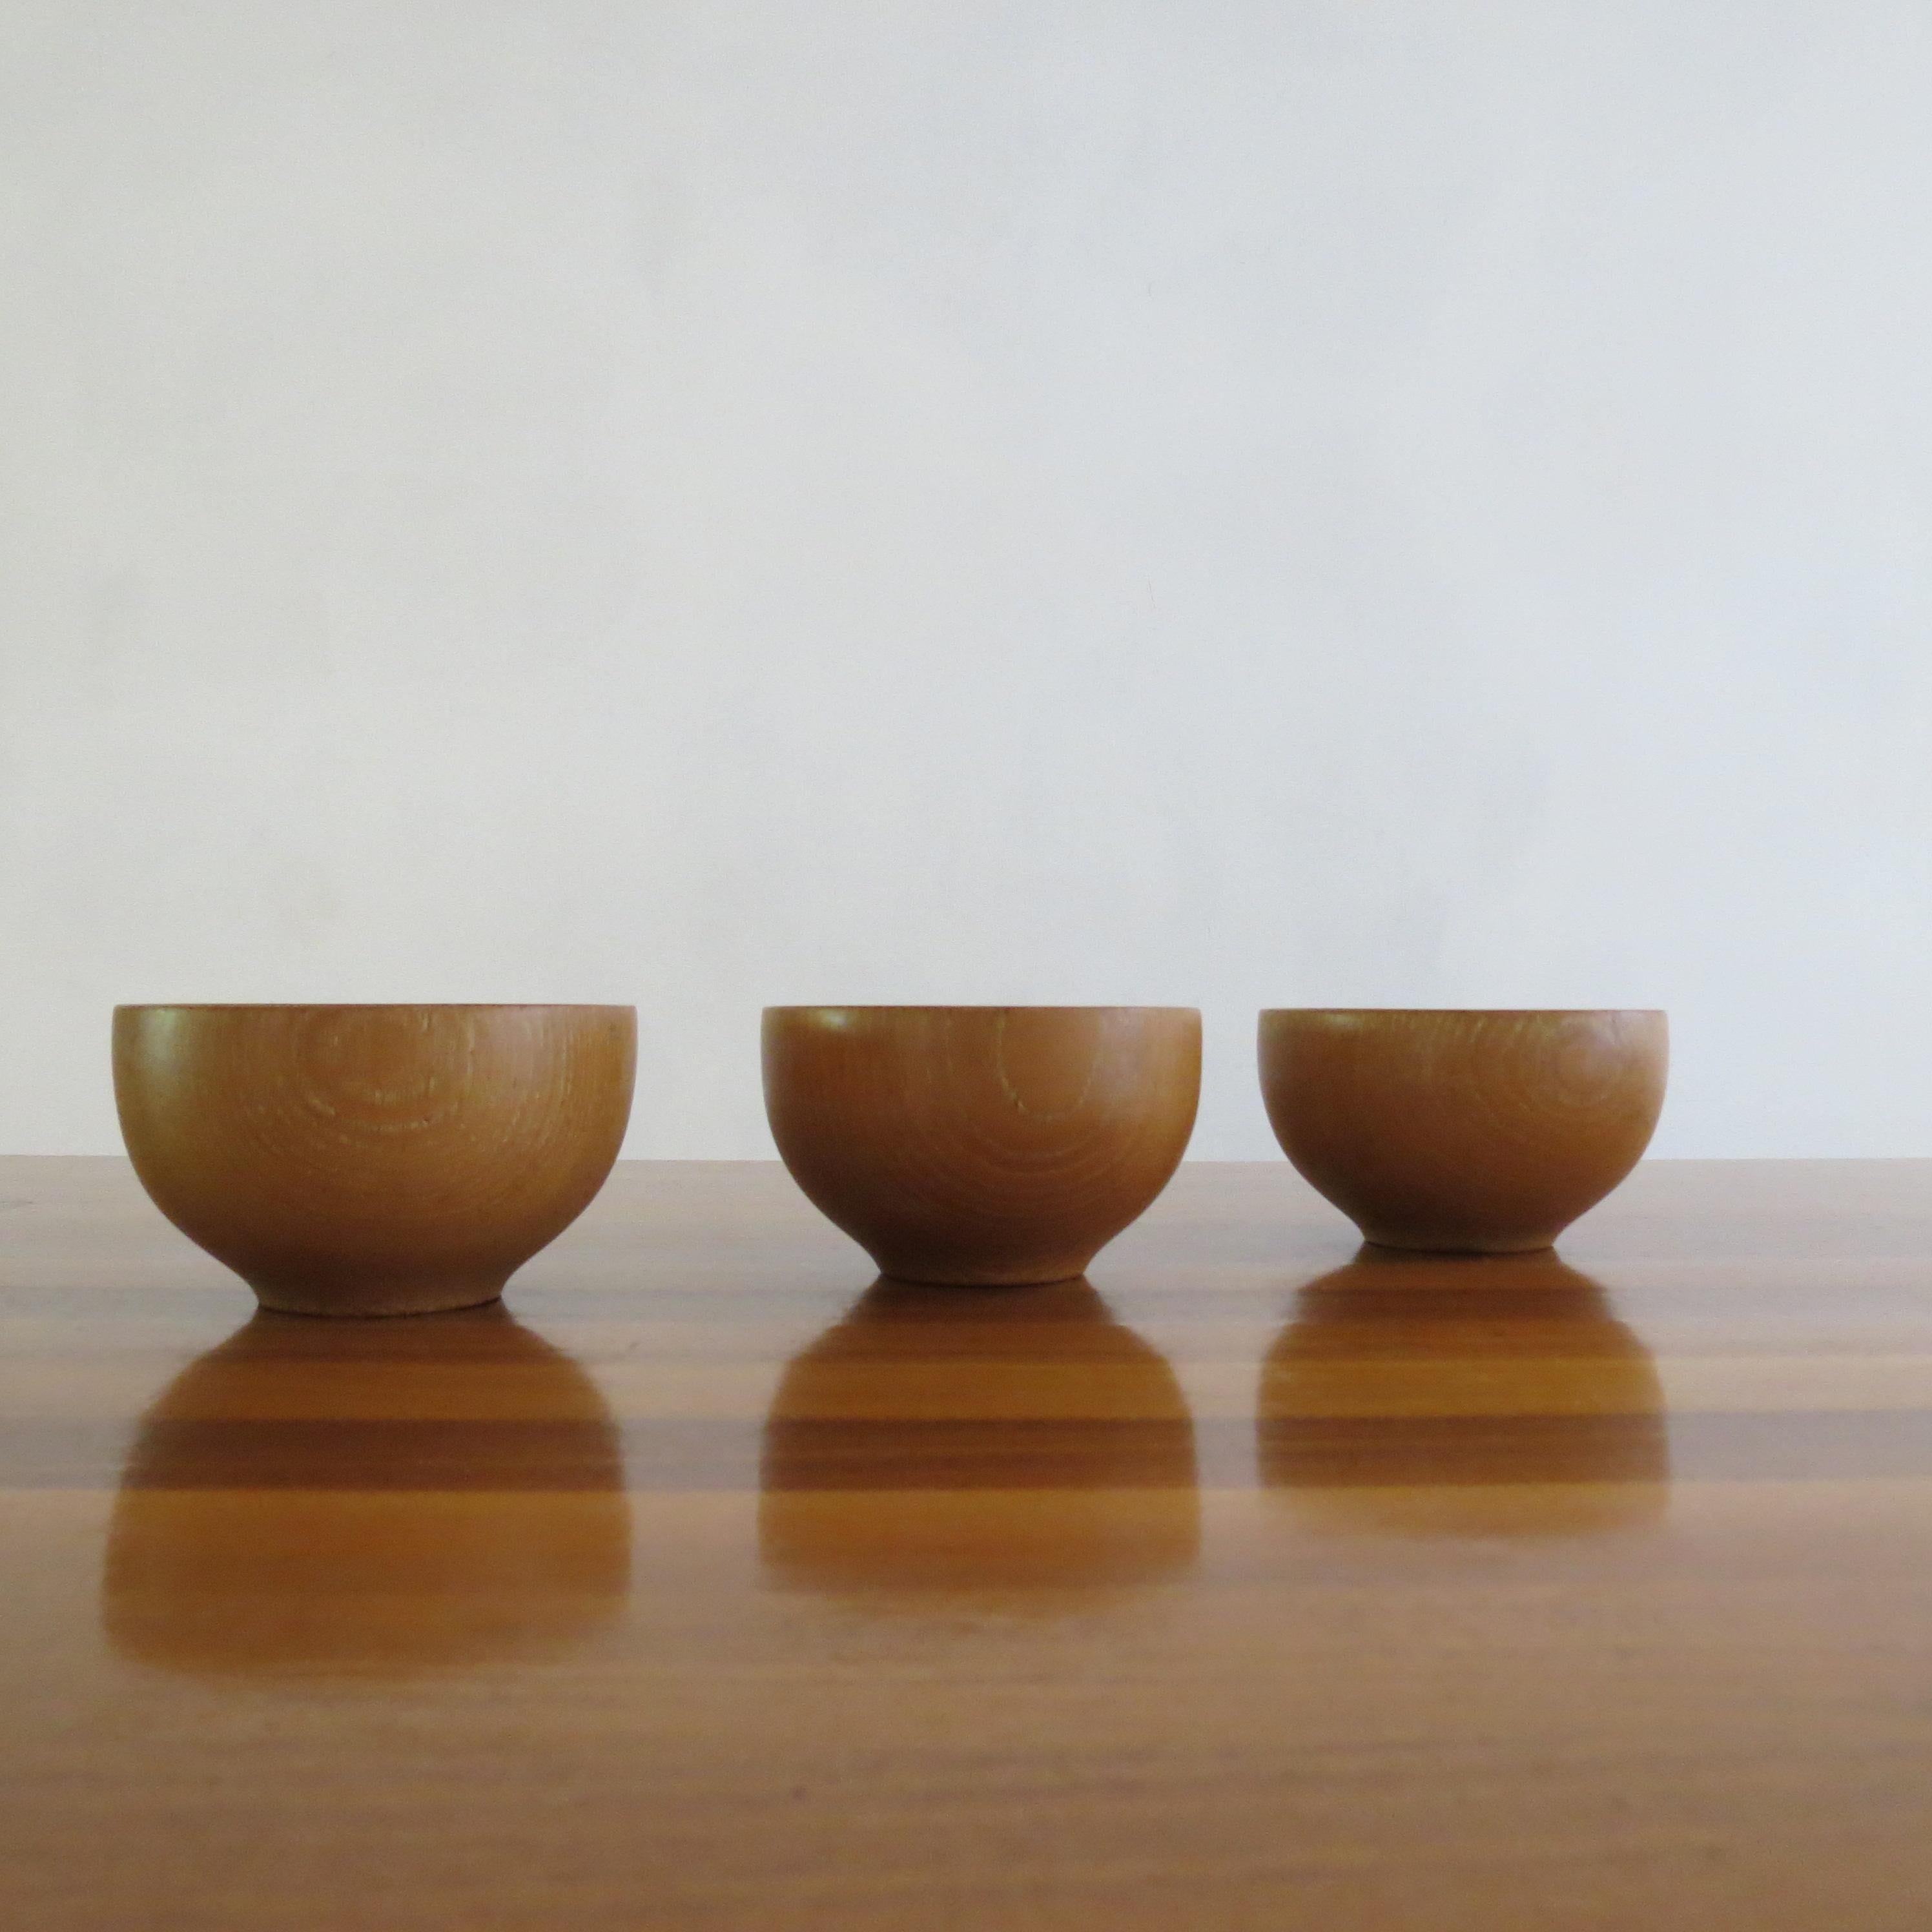 Beautifully turned elegant trio of hand turned bowls. The bowls have been exquisitely turned and have a very fine edge to the rim. Made from English Ash, the bowls have mellowed over time and are a lovely colour with beautiful grain. The set are